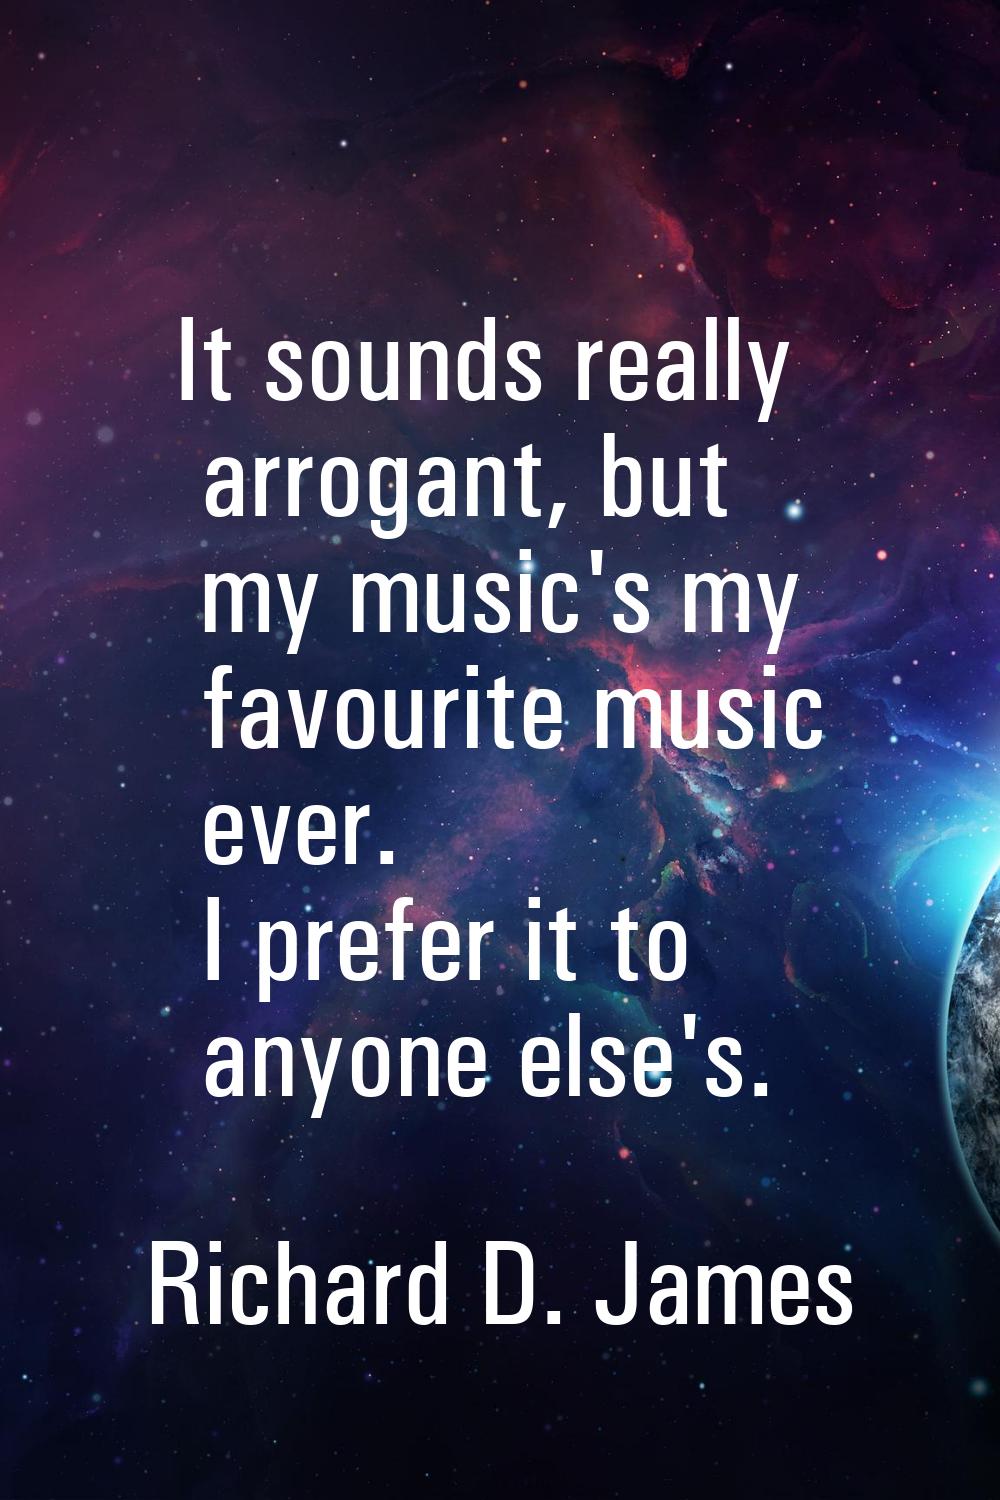 It sounds really arrogant, but my music's my favourite music ever. I prefer it to anyone else's.